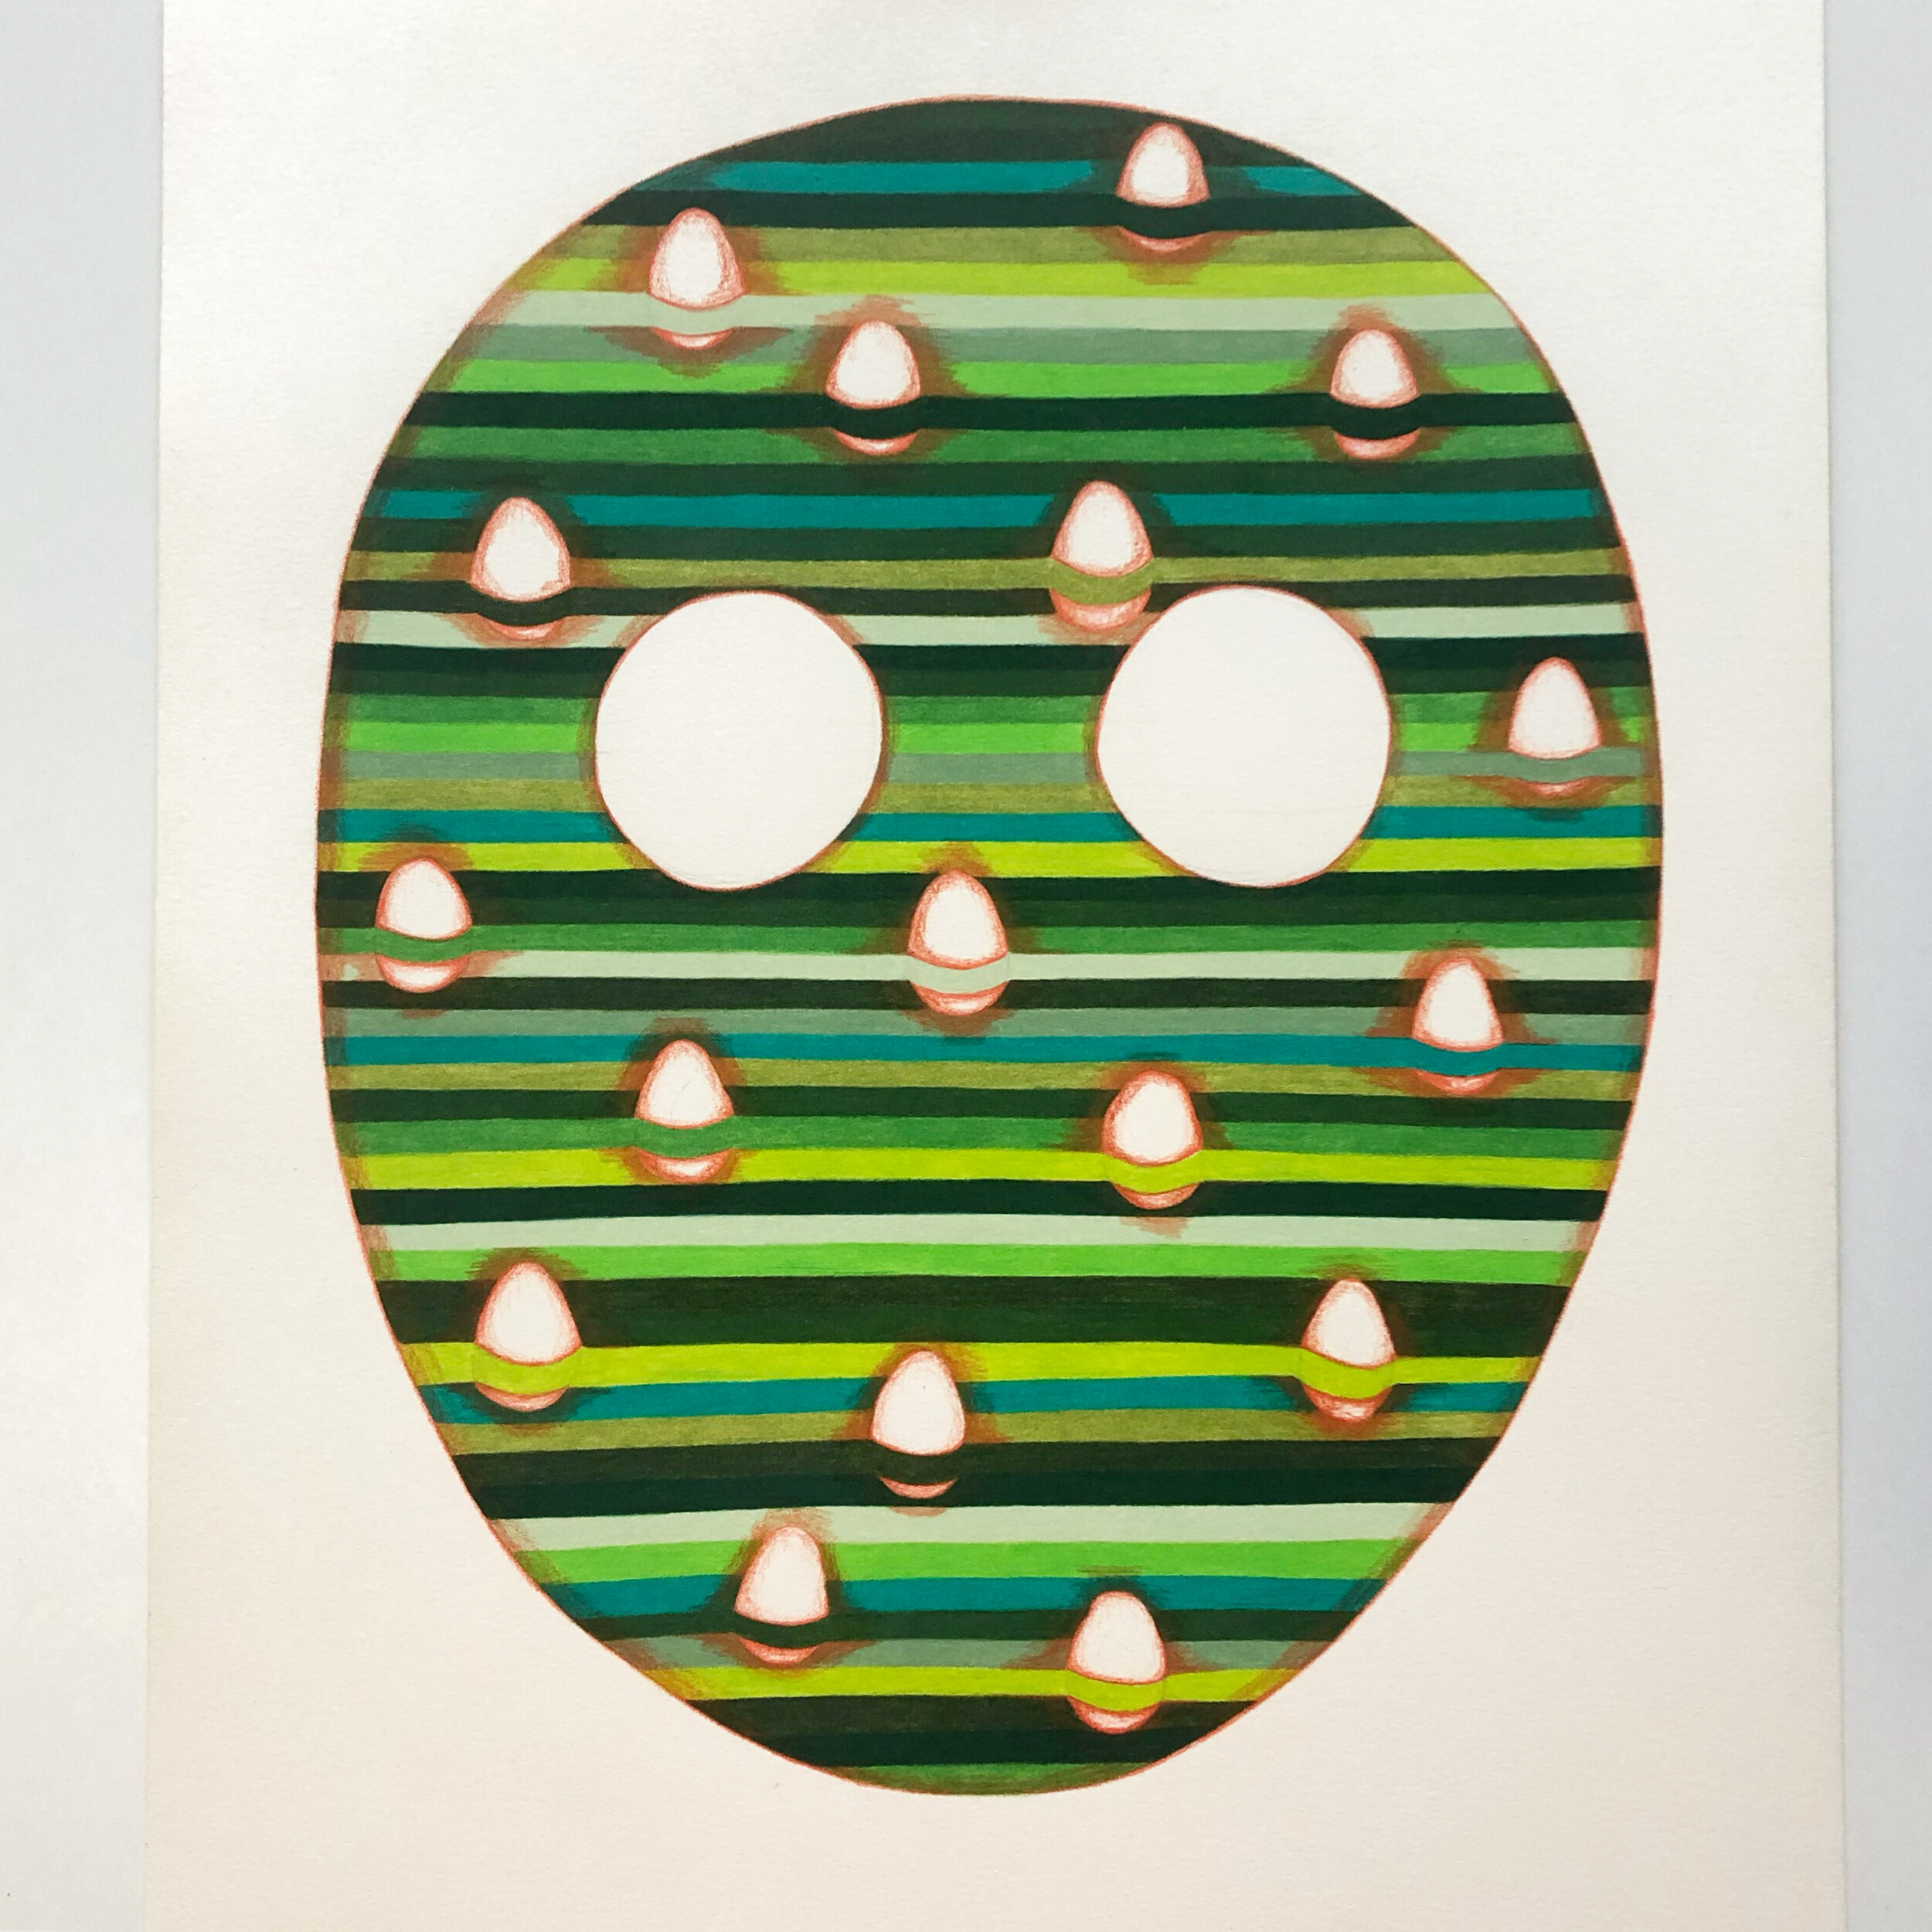 Mask with Eggs, 2020, colored pencil on paper, 16 1/4 x 13 1/4"